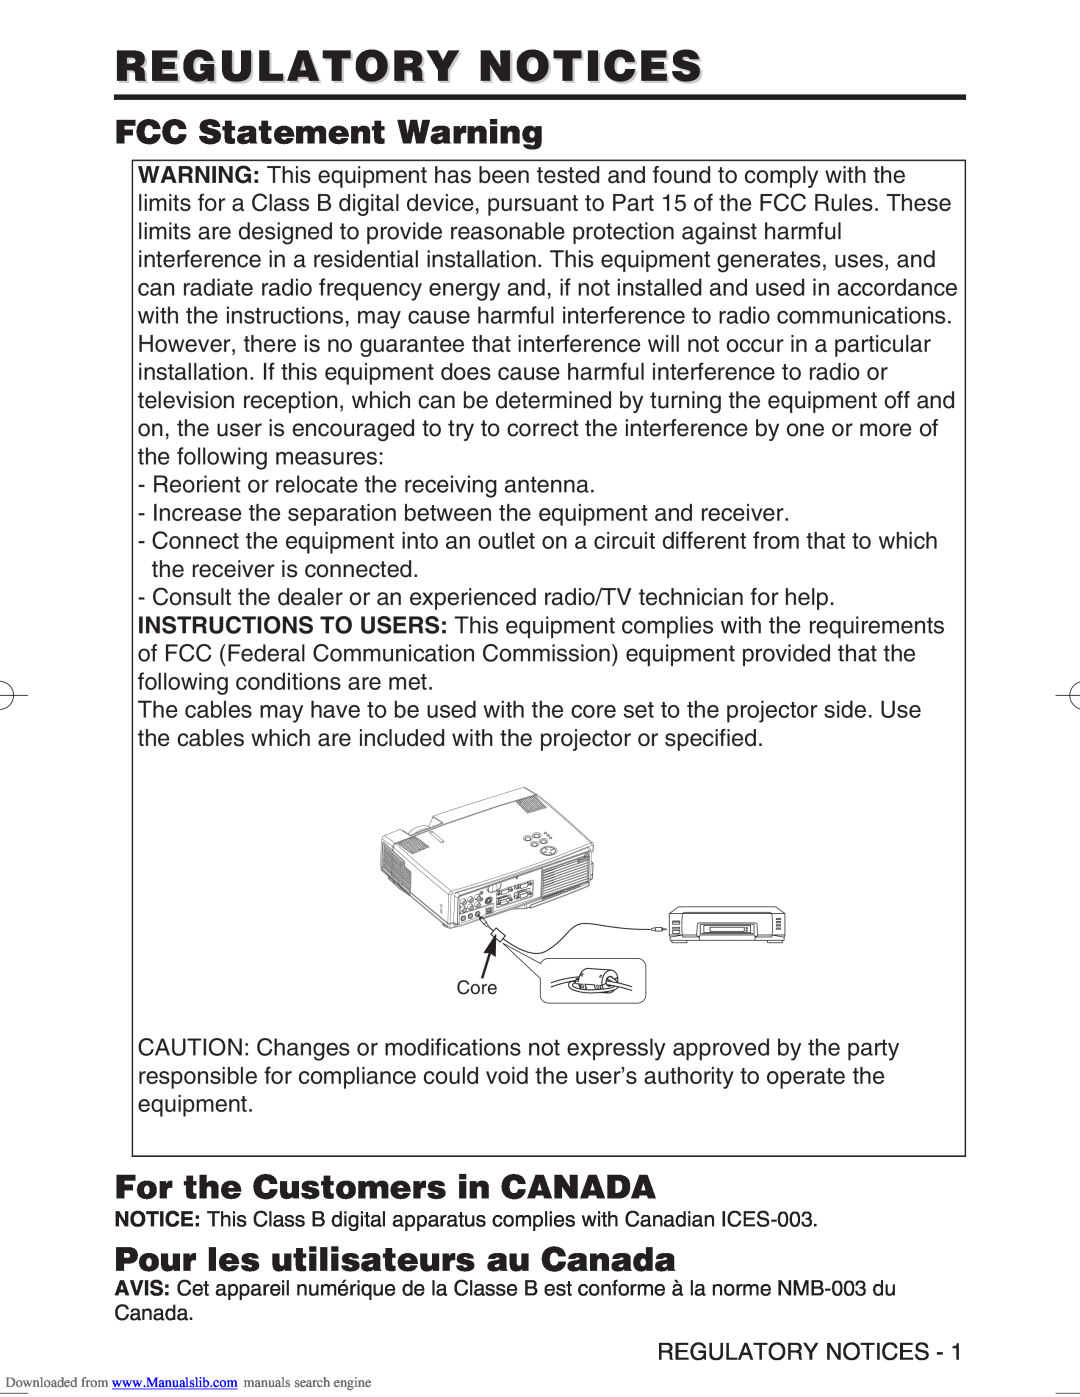 Hitachi CP-S370W Regulatory Notices, FCC Statement Warning, For the Customers in CANADA, Pour les utilisateurs au Canada 